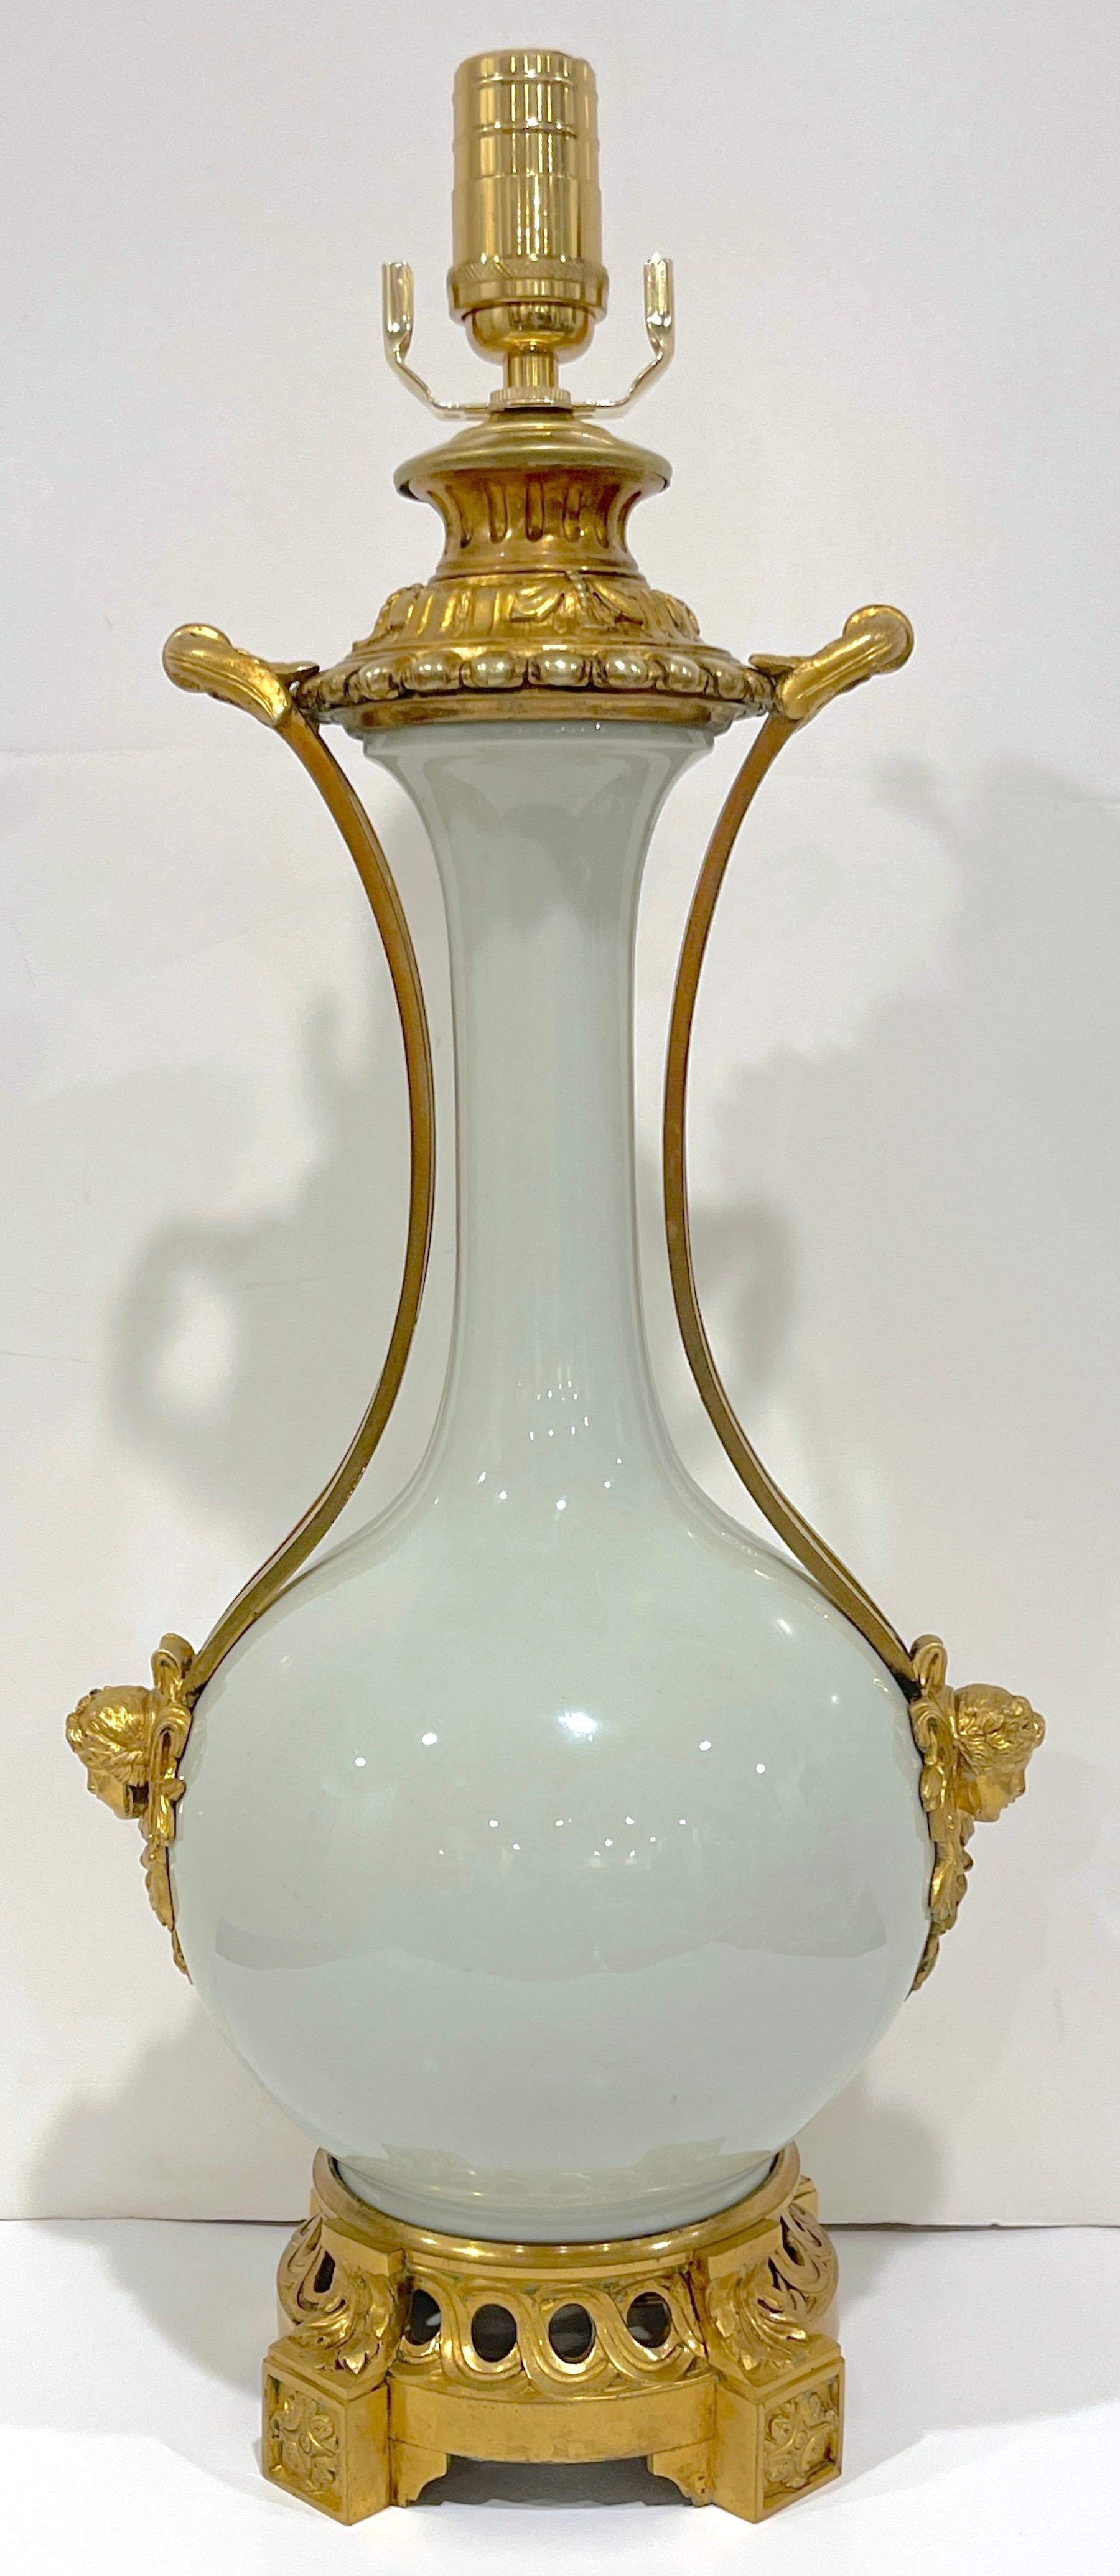 19th century Louis XV Style Ormolu Mounted Celadon Porcelain Lamp
France, circa 1860s, Now Electrified, Newly Rewired.

This 19th-century Louis XV style ormolu mounted celadon porcelain lamp from France, dating back to the 1860s, is a stunning